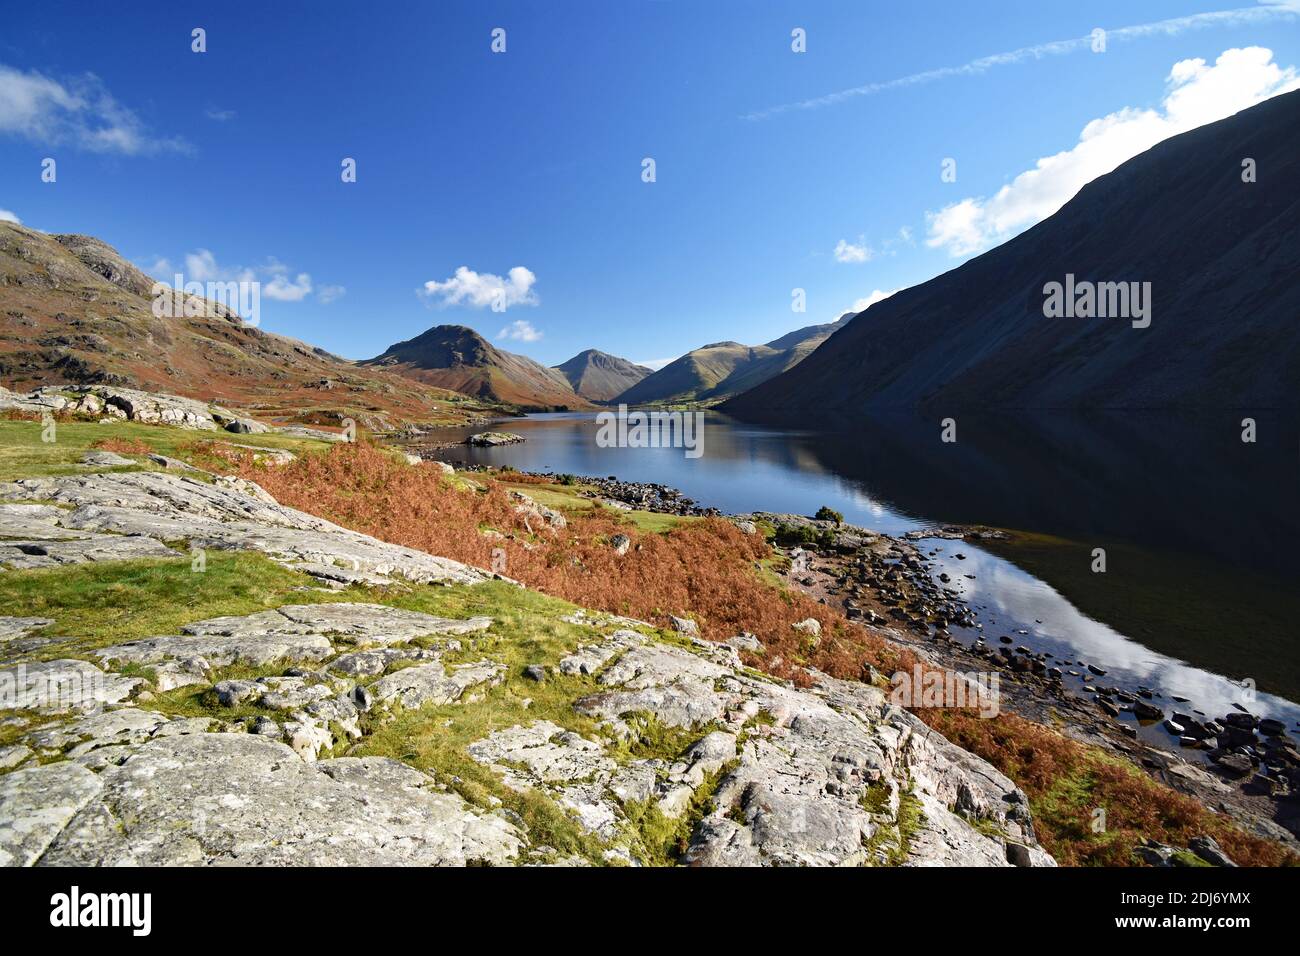 Wast Water or Wastwater Lake in the Lake District National Park, England. Autumn colours on the mountains and foliage. Sun position casts a shadow. Stock Photo